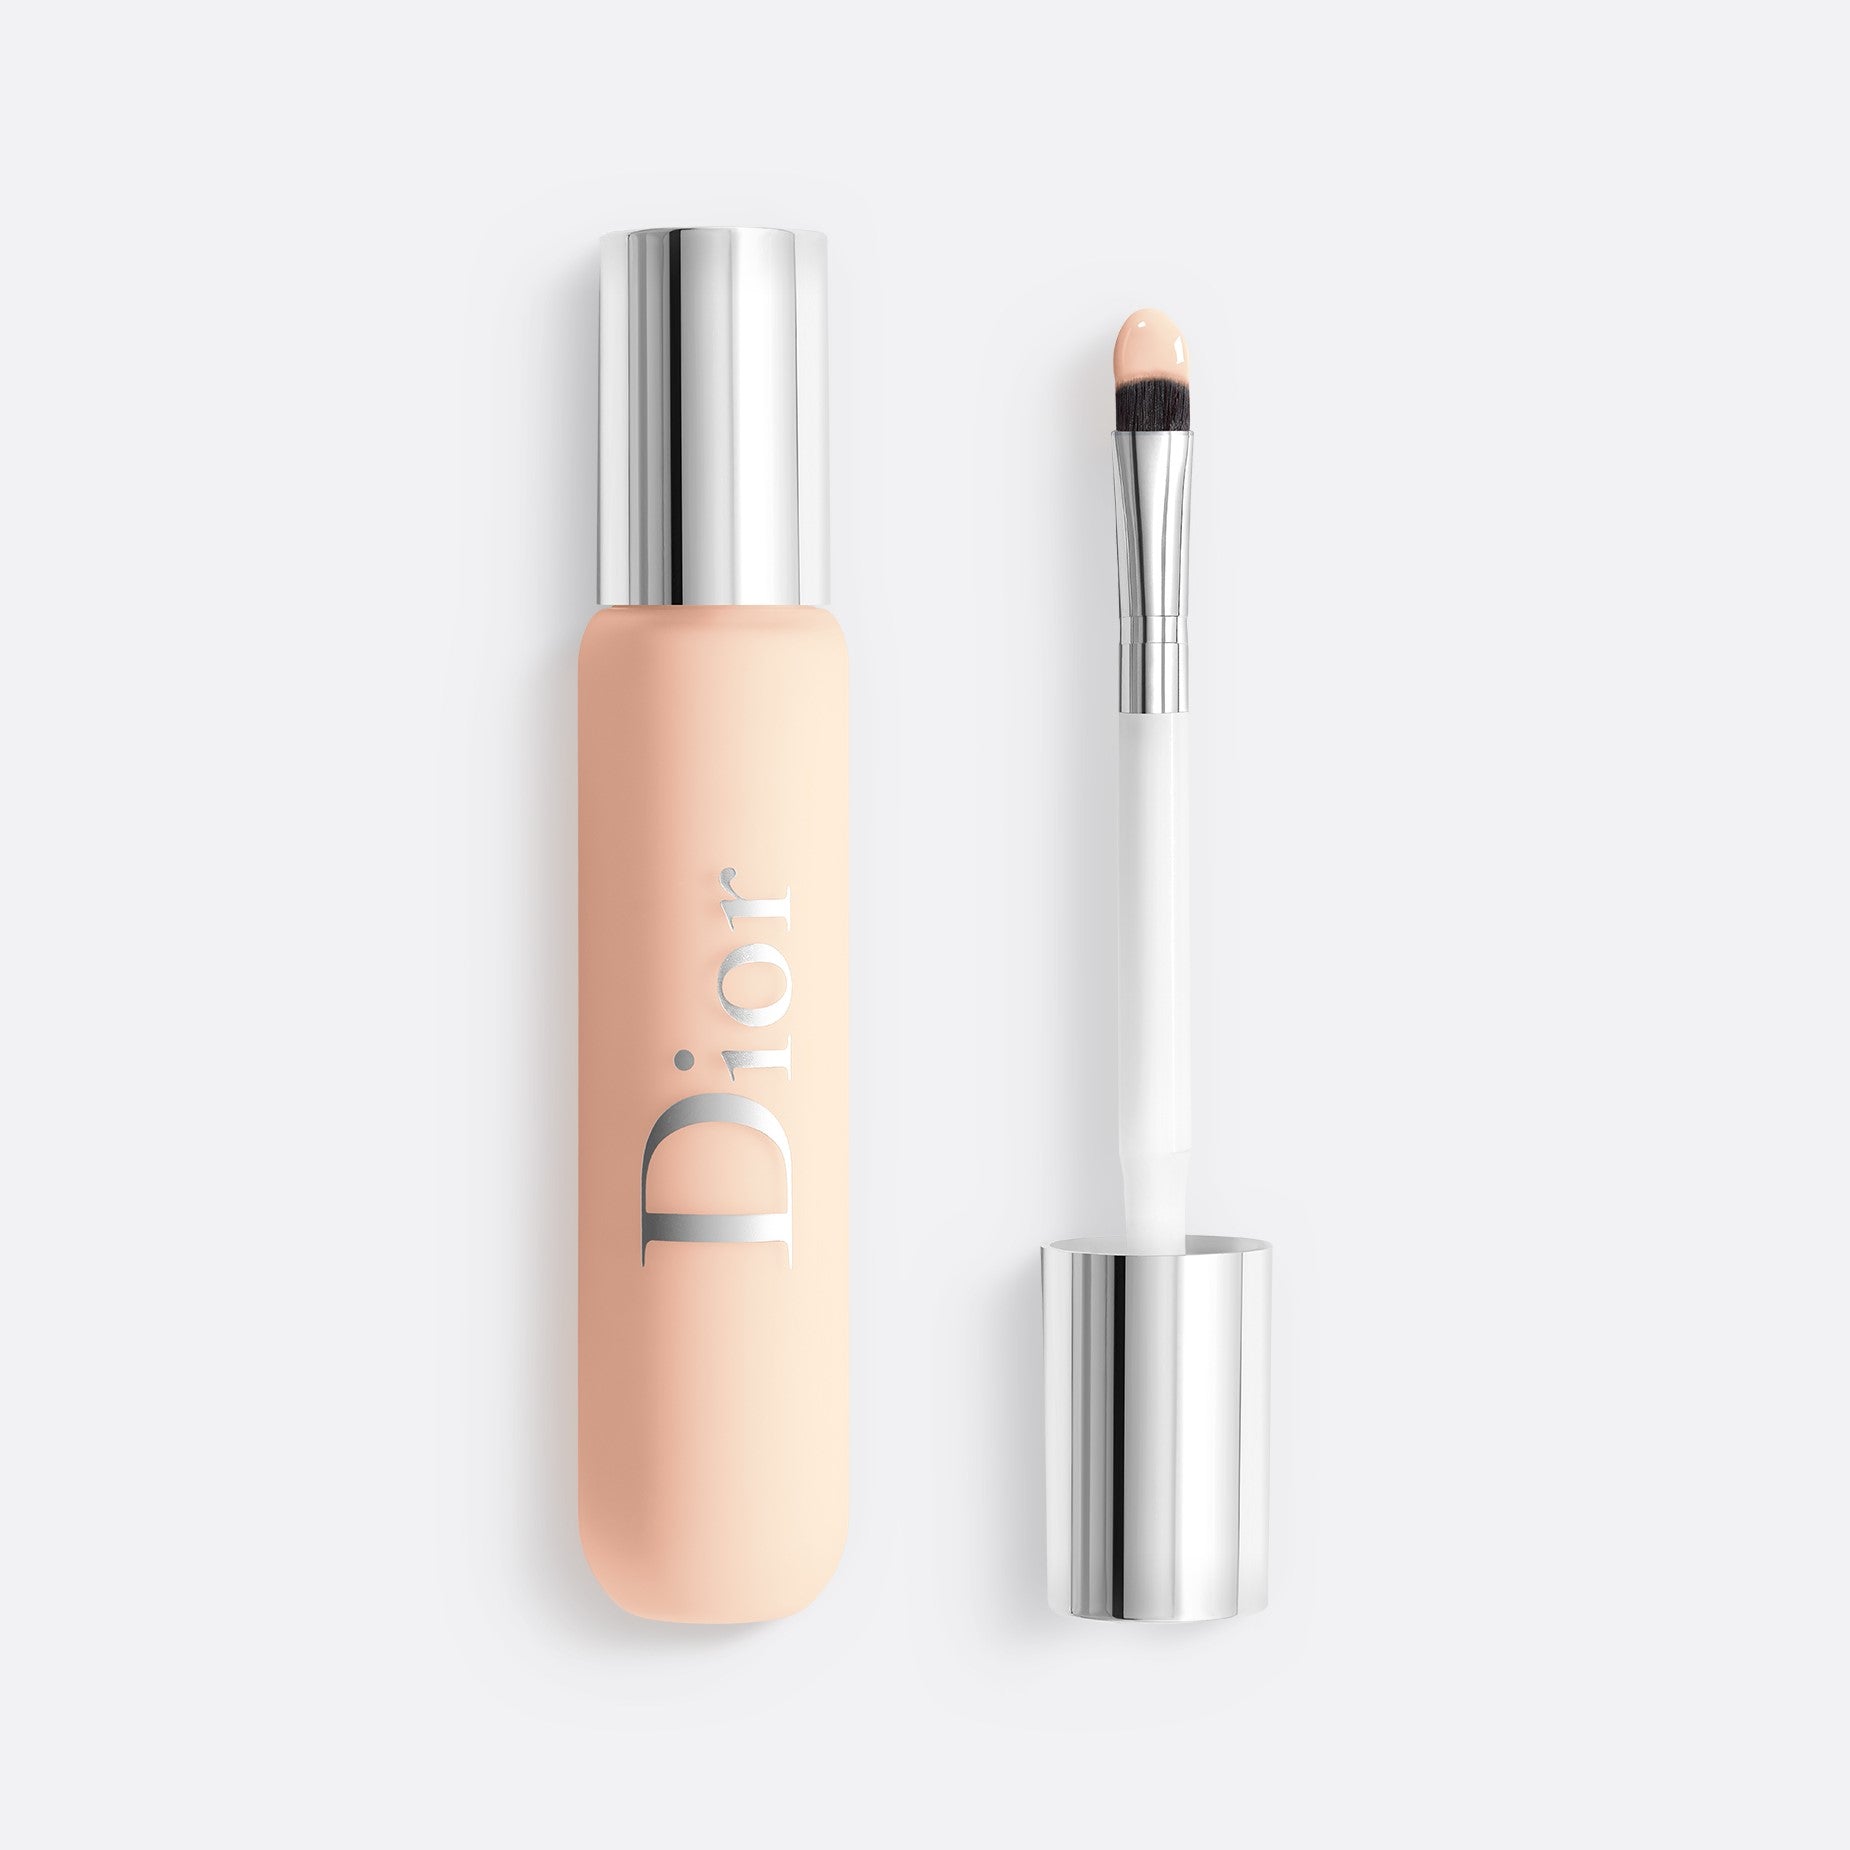 DIOR BACKSTAGE FACE & BODY FLASH PERFECTOR CONCEALER | Complexion concealer - Face and Body - high coverage - natural glow finish - waterproof wear